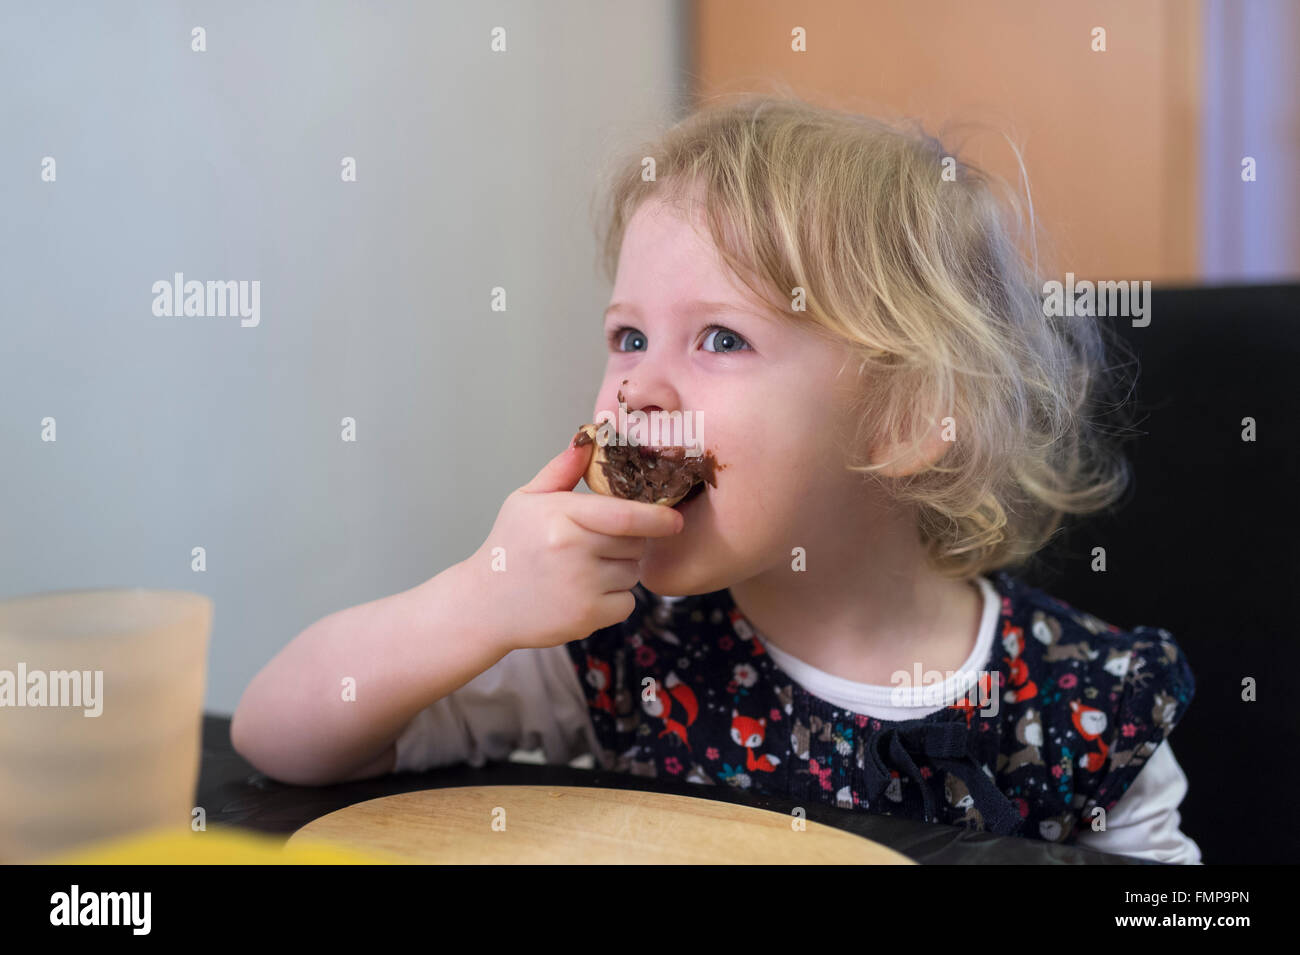 Little blonde girl biting into a bun with chocolate spread, Germany Stock Photo